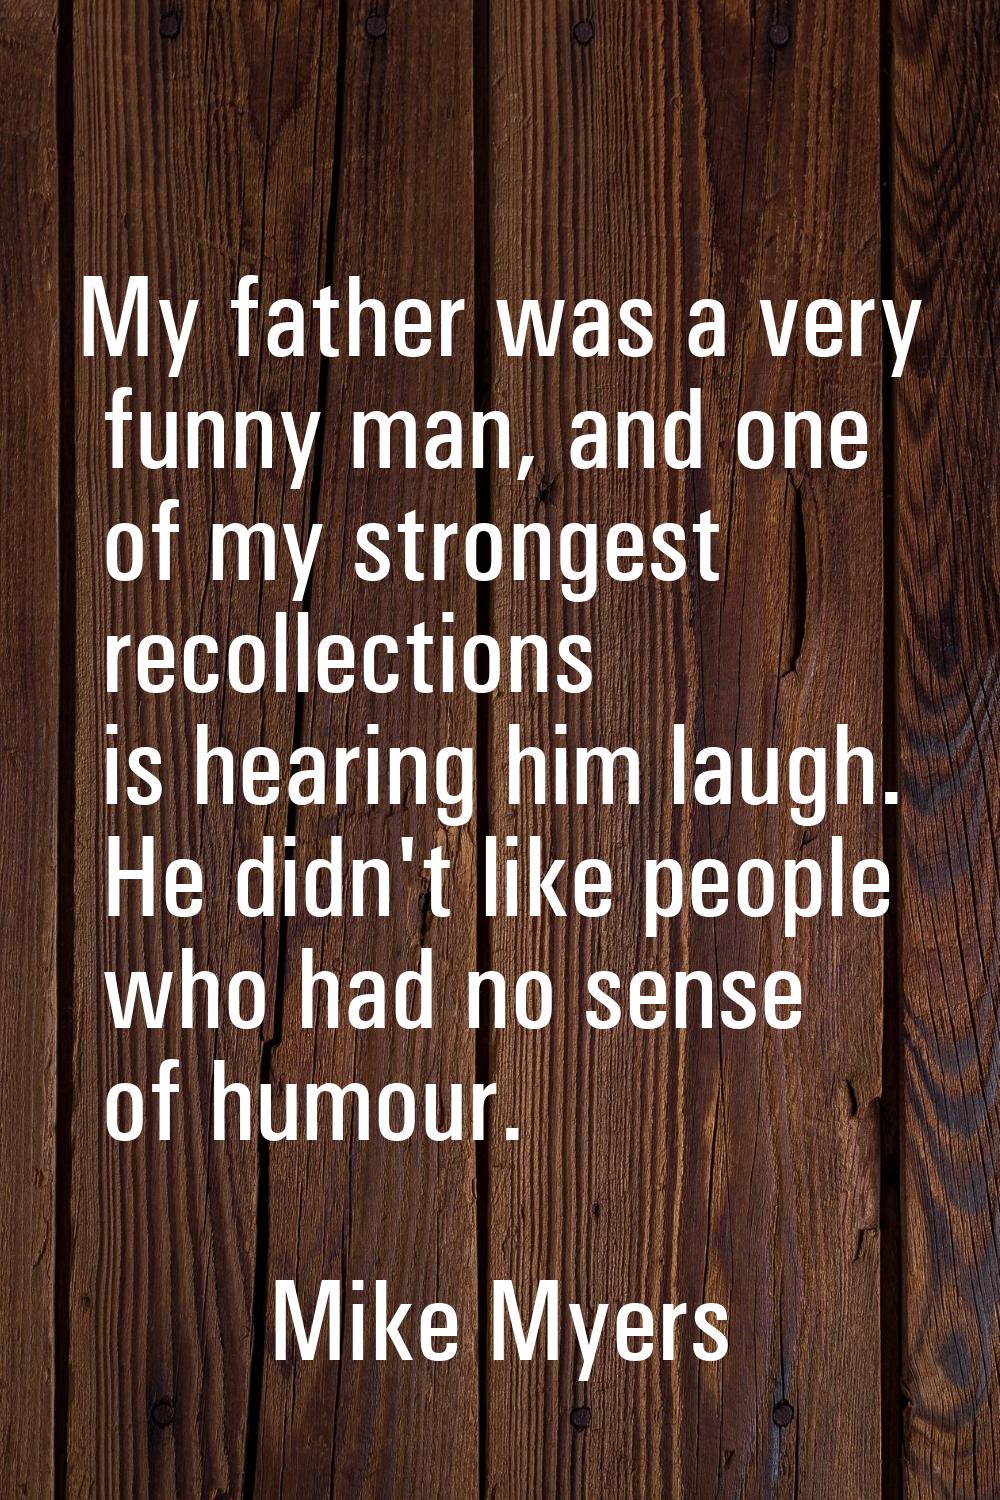 My father was a very funny man, and one of my strongest recollections is hearing him laugh. He didn